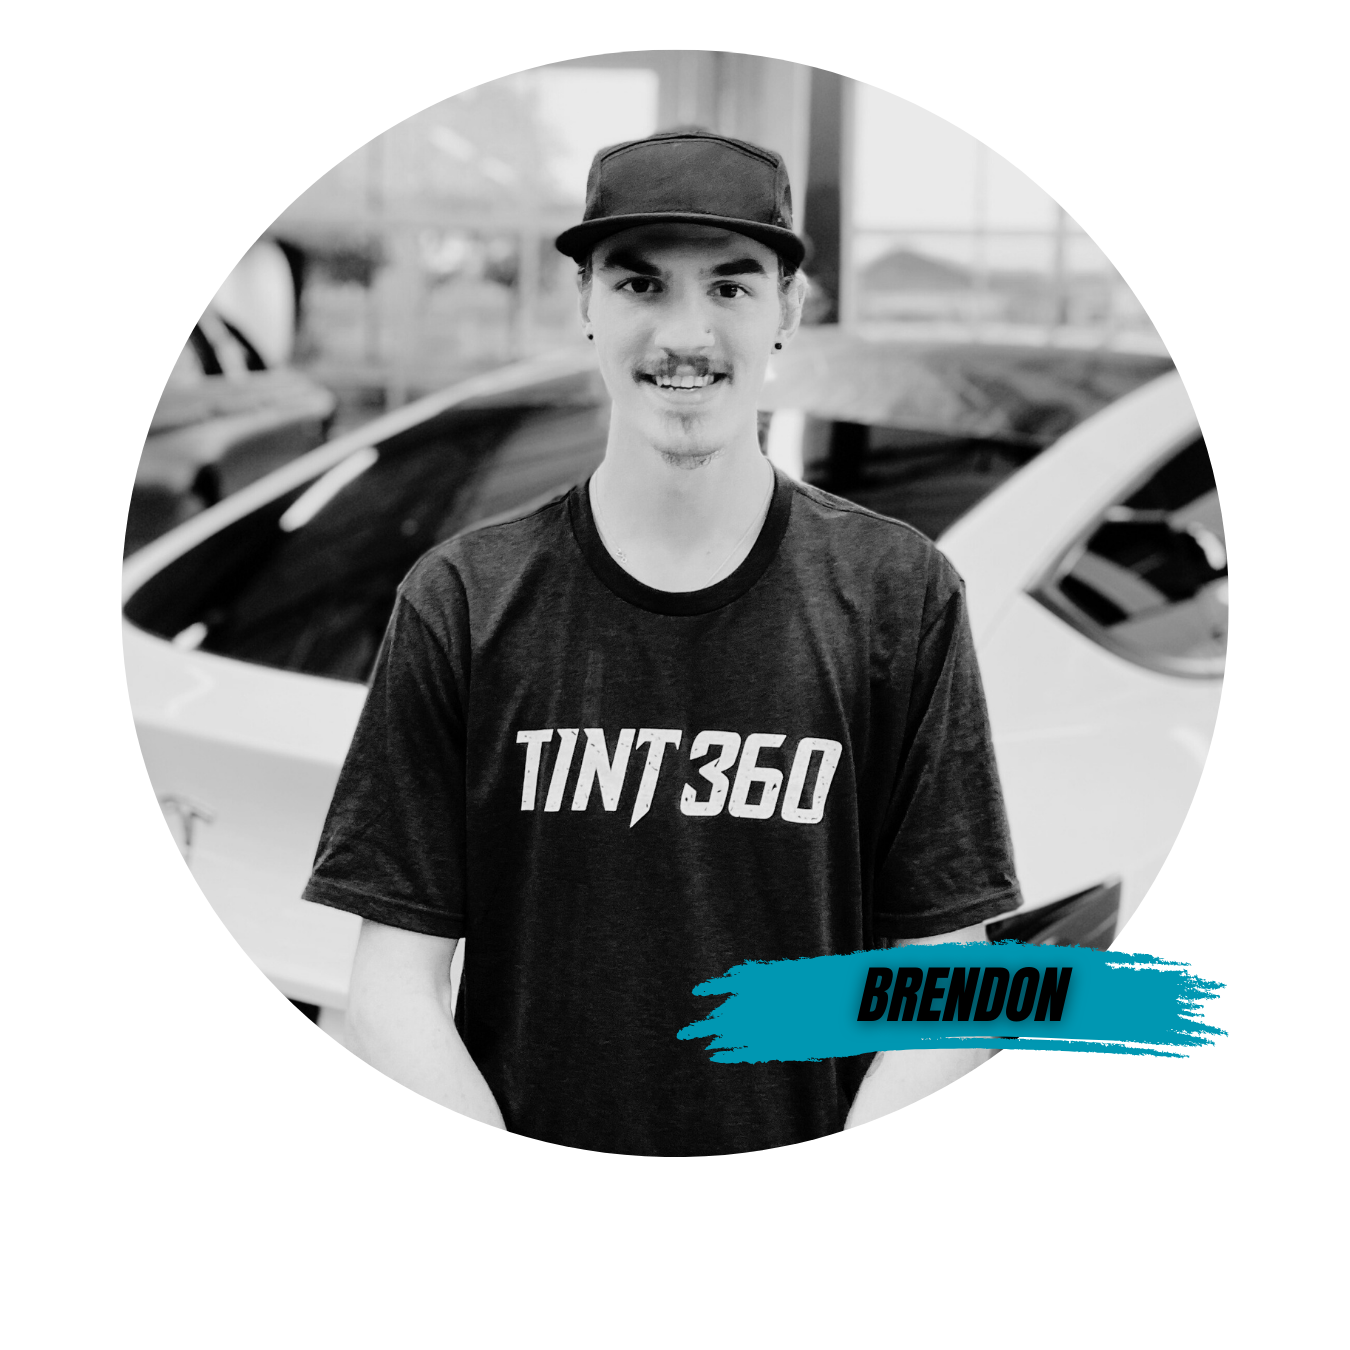 Brendon from Tint 360